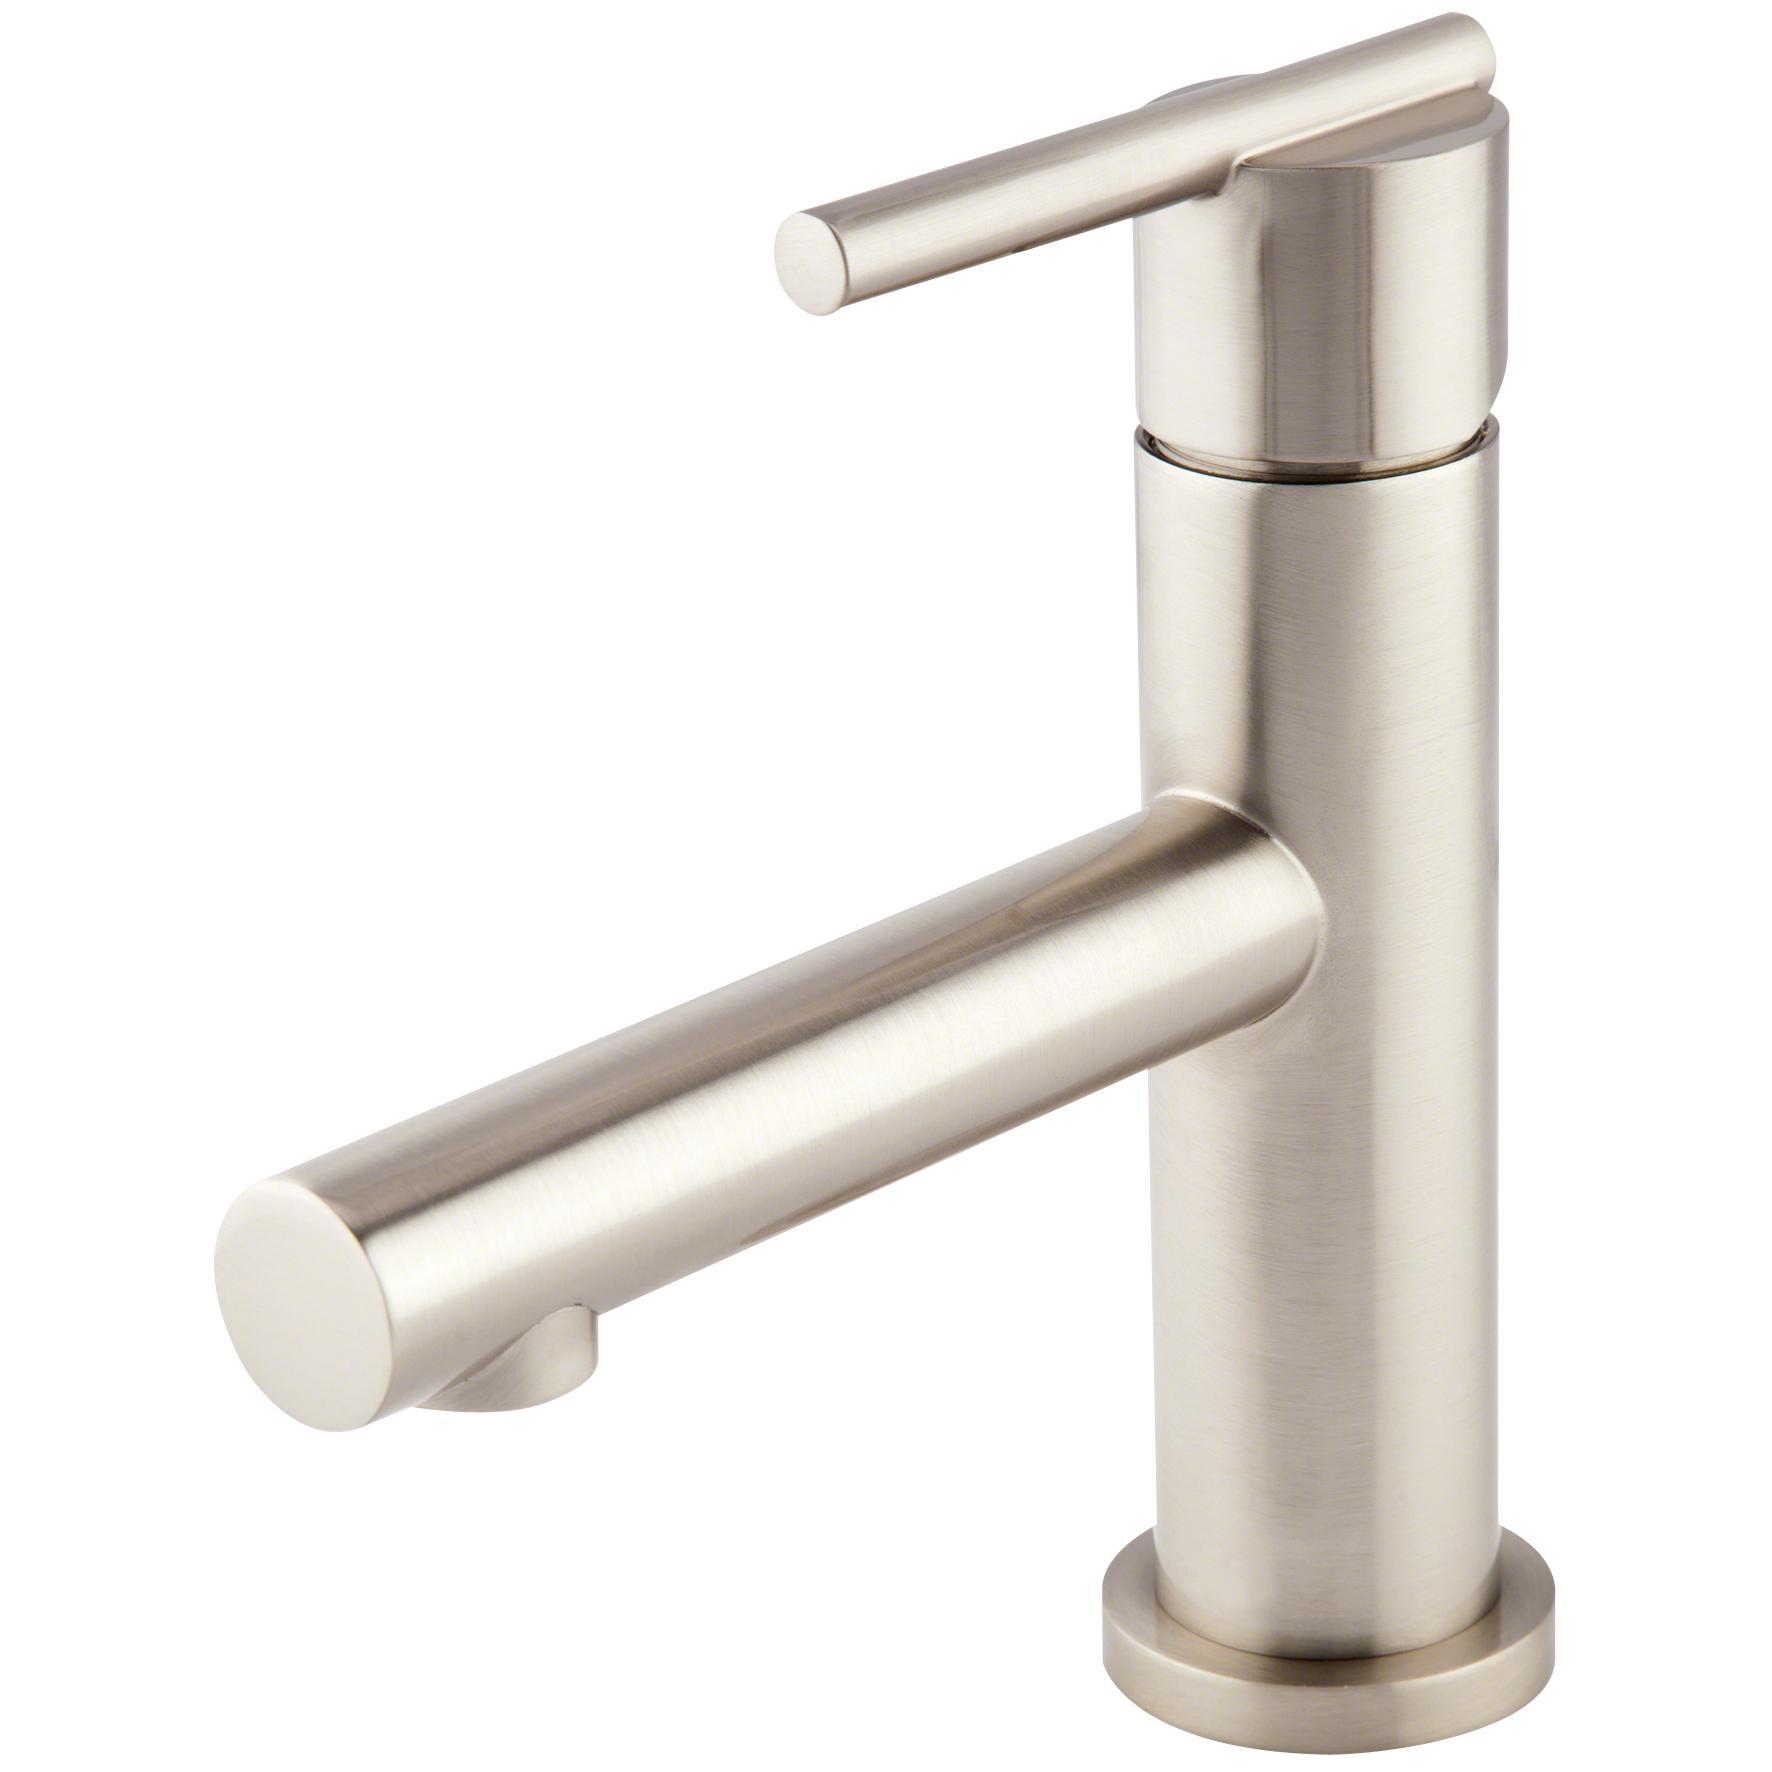 Danze D224158BN Parma Trim Line 1H Lavatory Faucet Single Hole Mount w/ Metal Touch Down Drain & Optional Deck Plate Included - Brushed Nickel